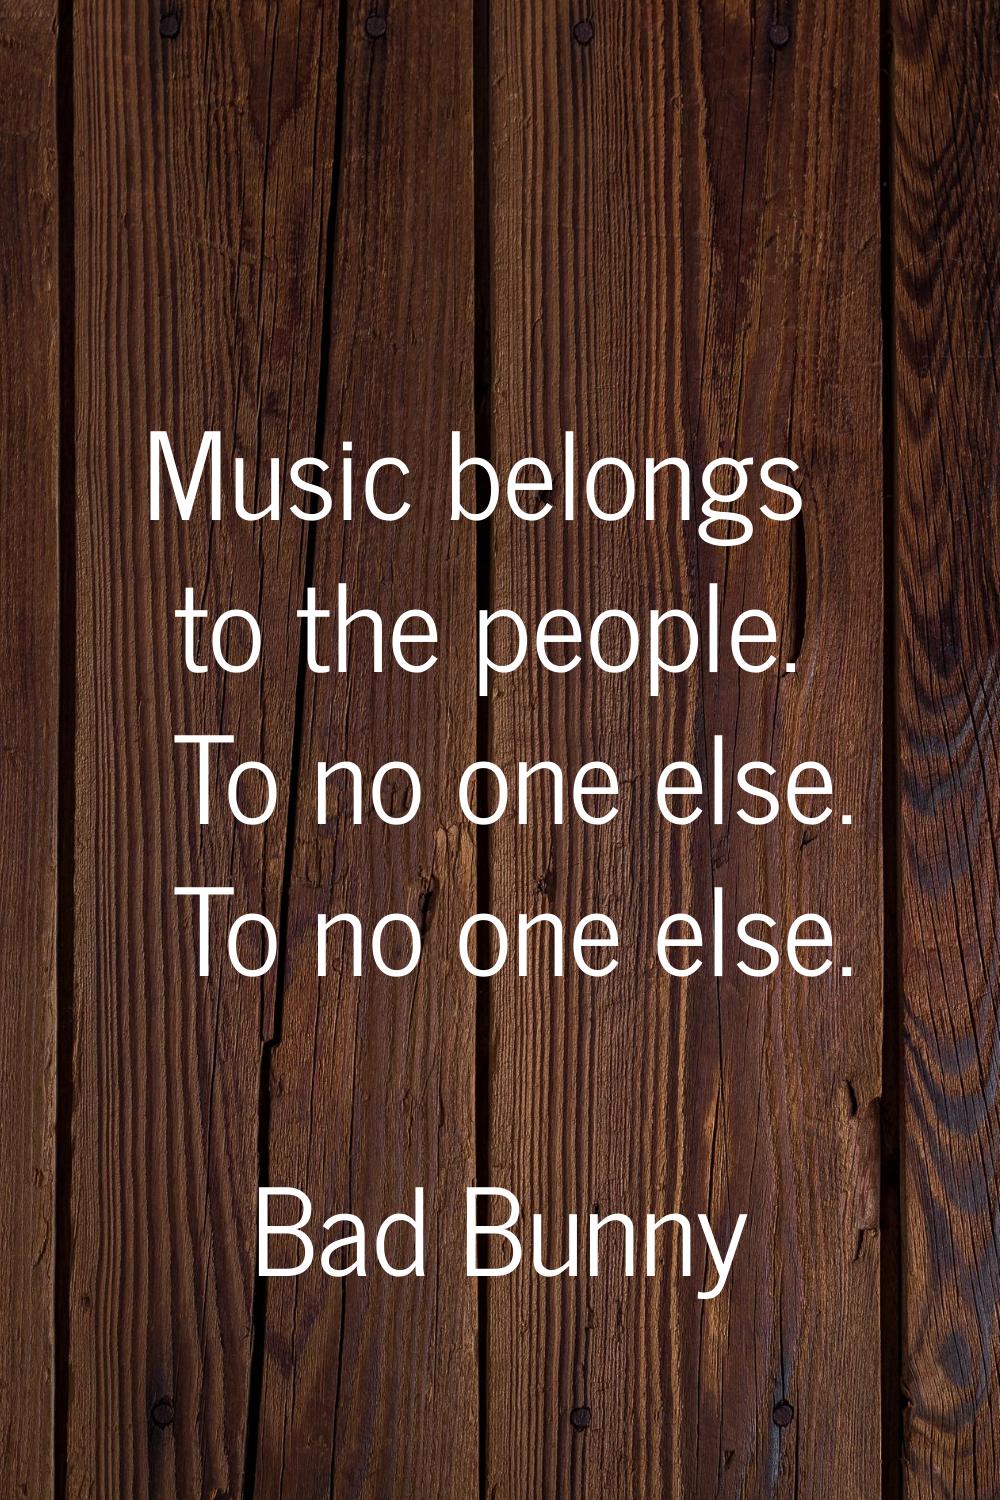 Music belongs to the people. To no one else. To no one else.